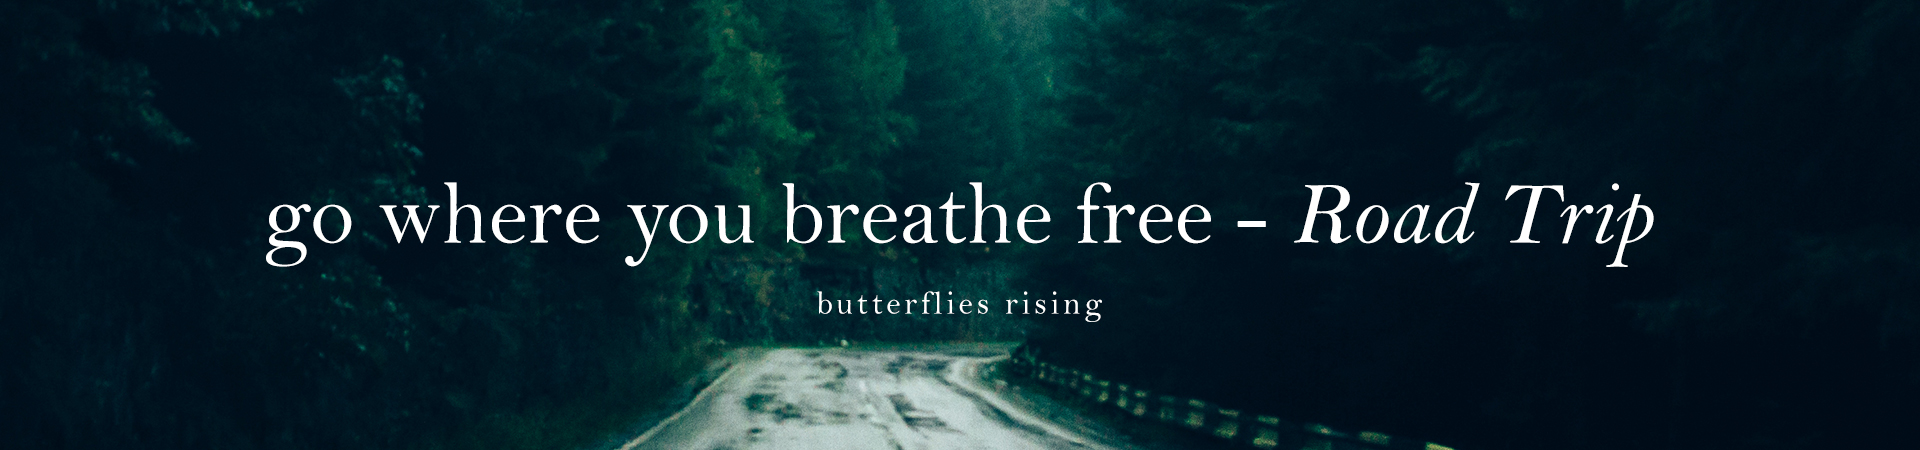 go where you breathe free - butterflies rising - road trip collection